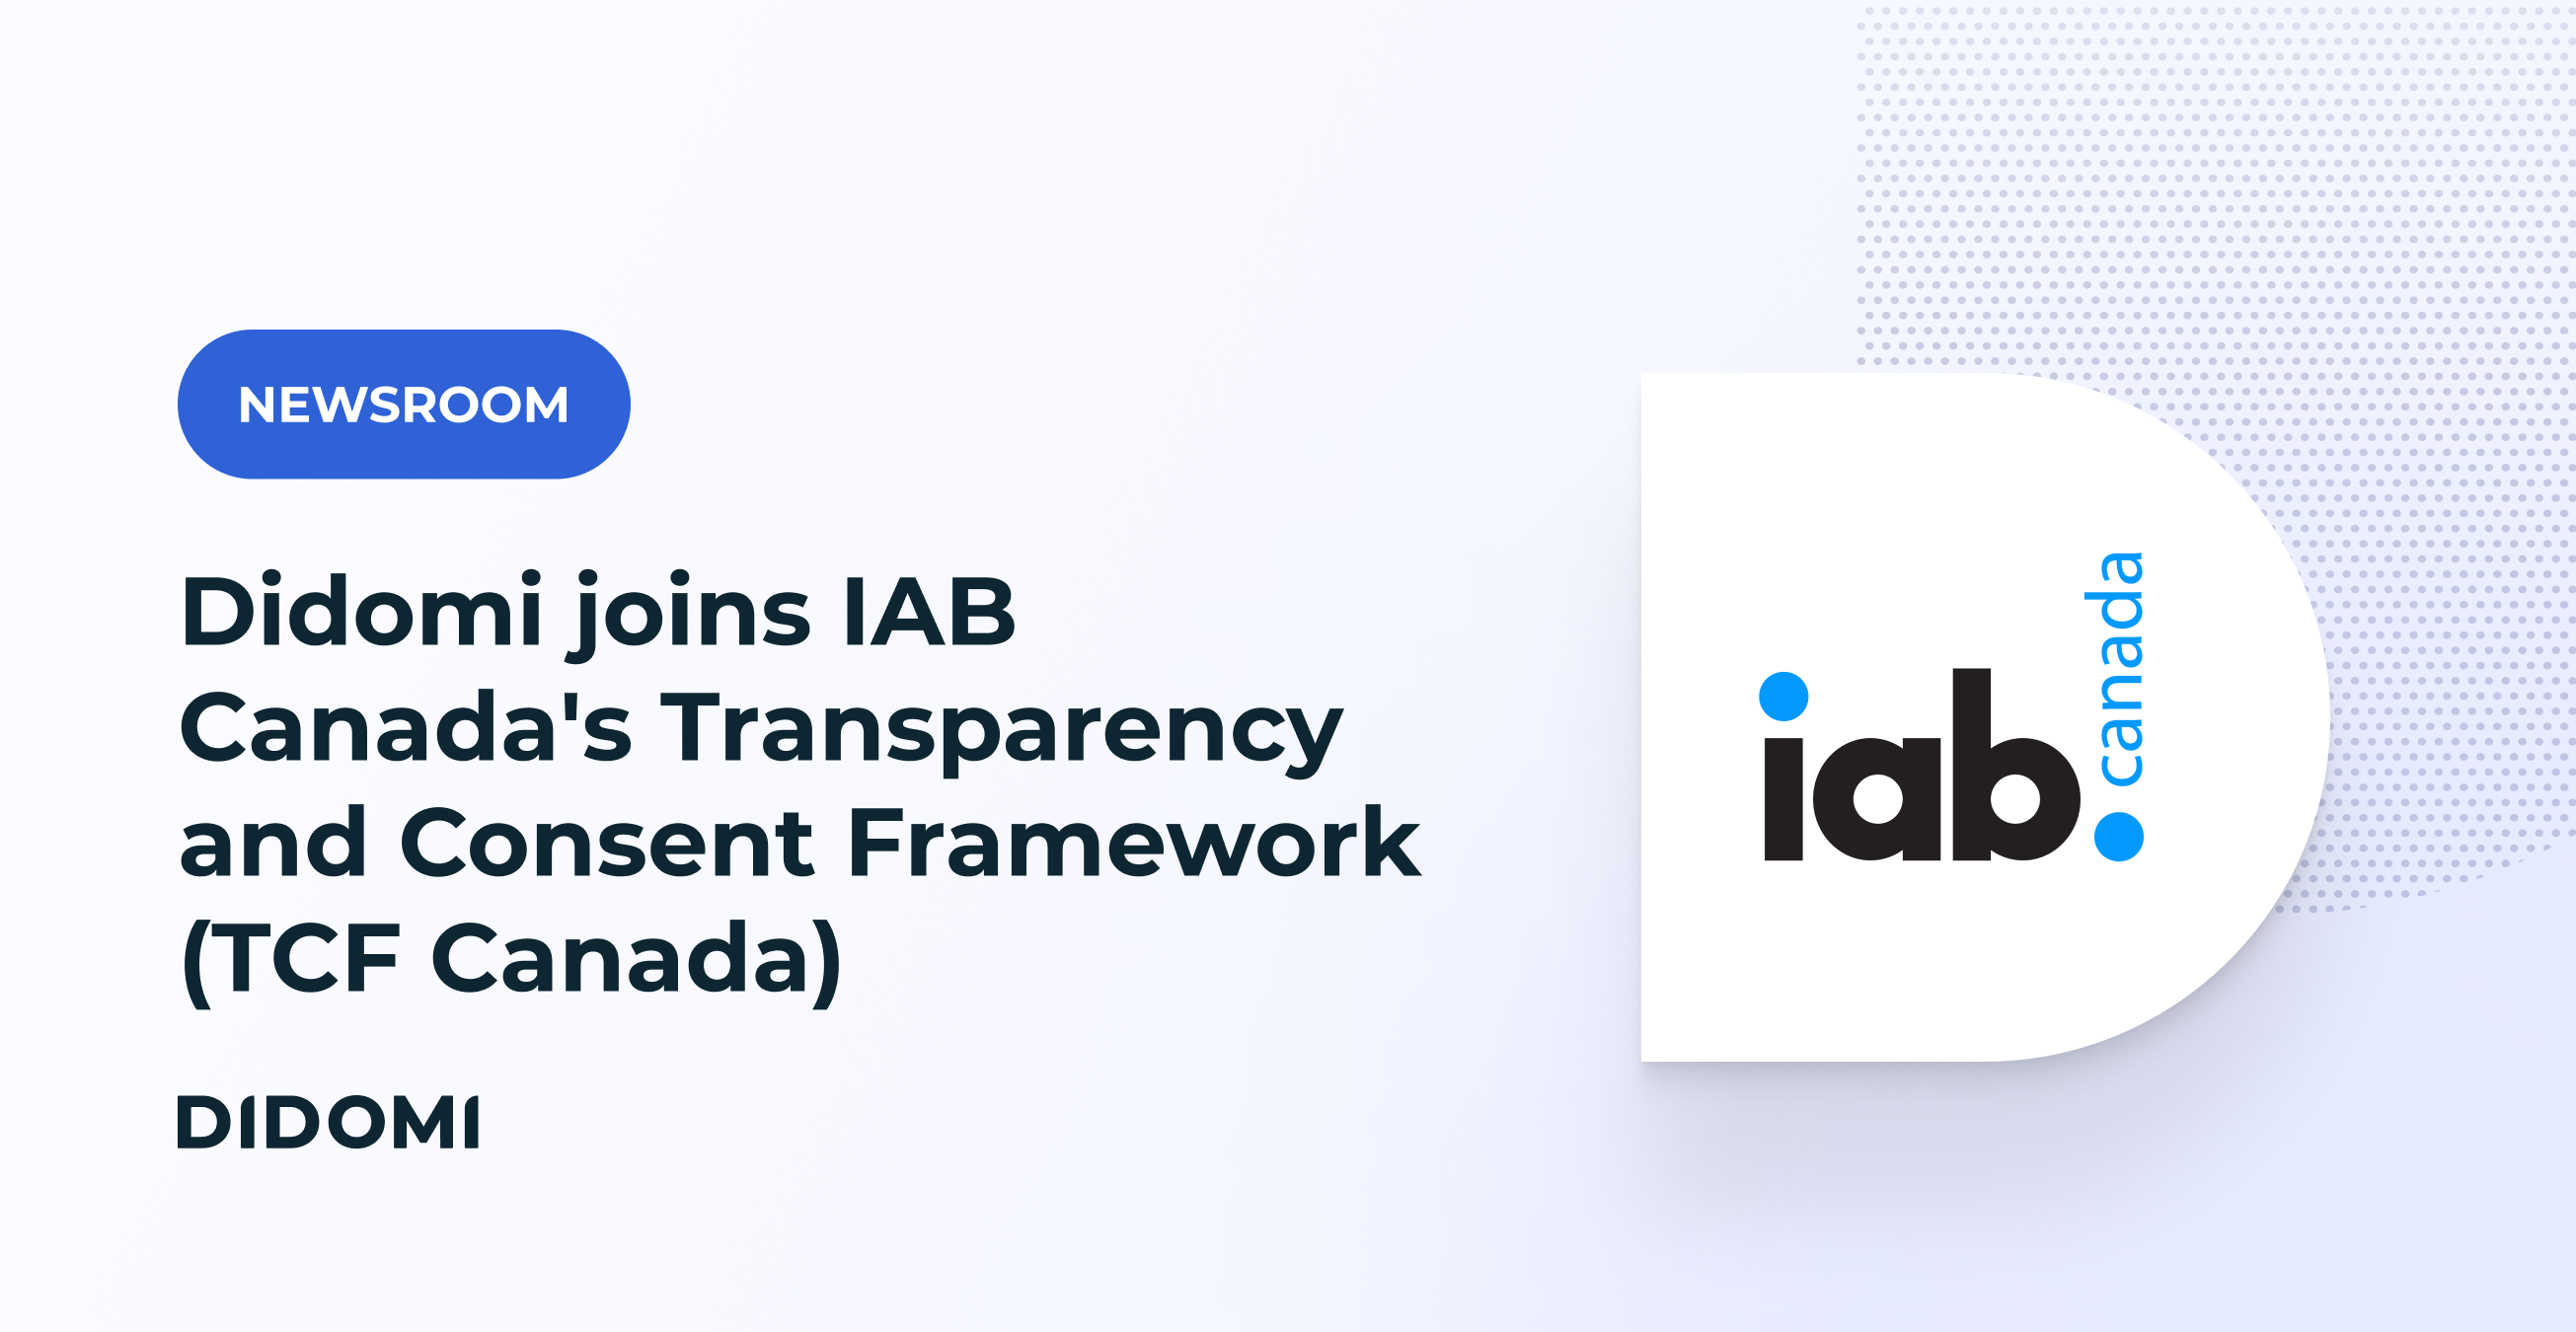 Didomi joins IAB Canada's Transparency and Consent Framework (TCF Canada)